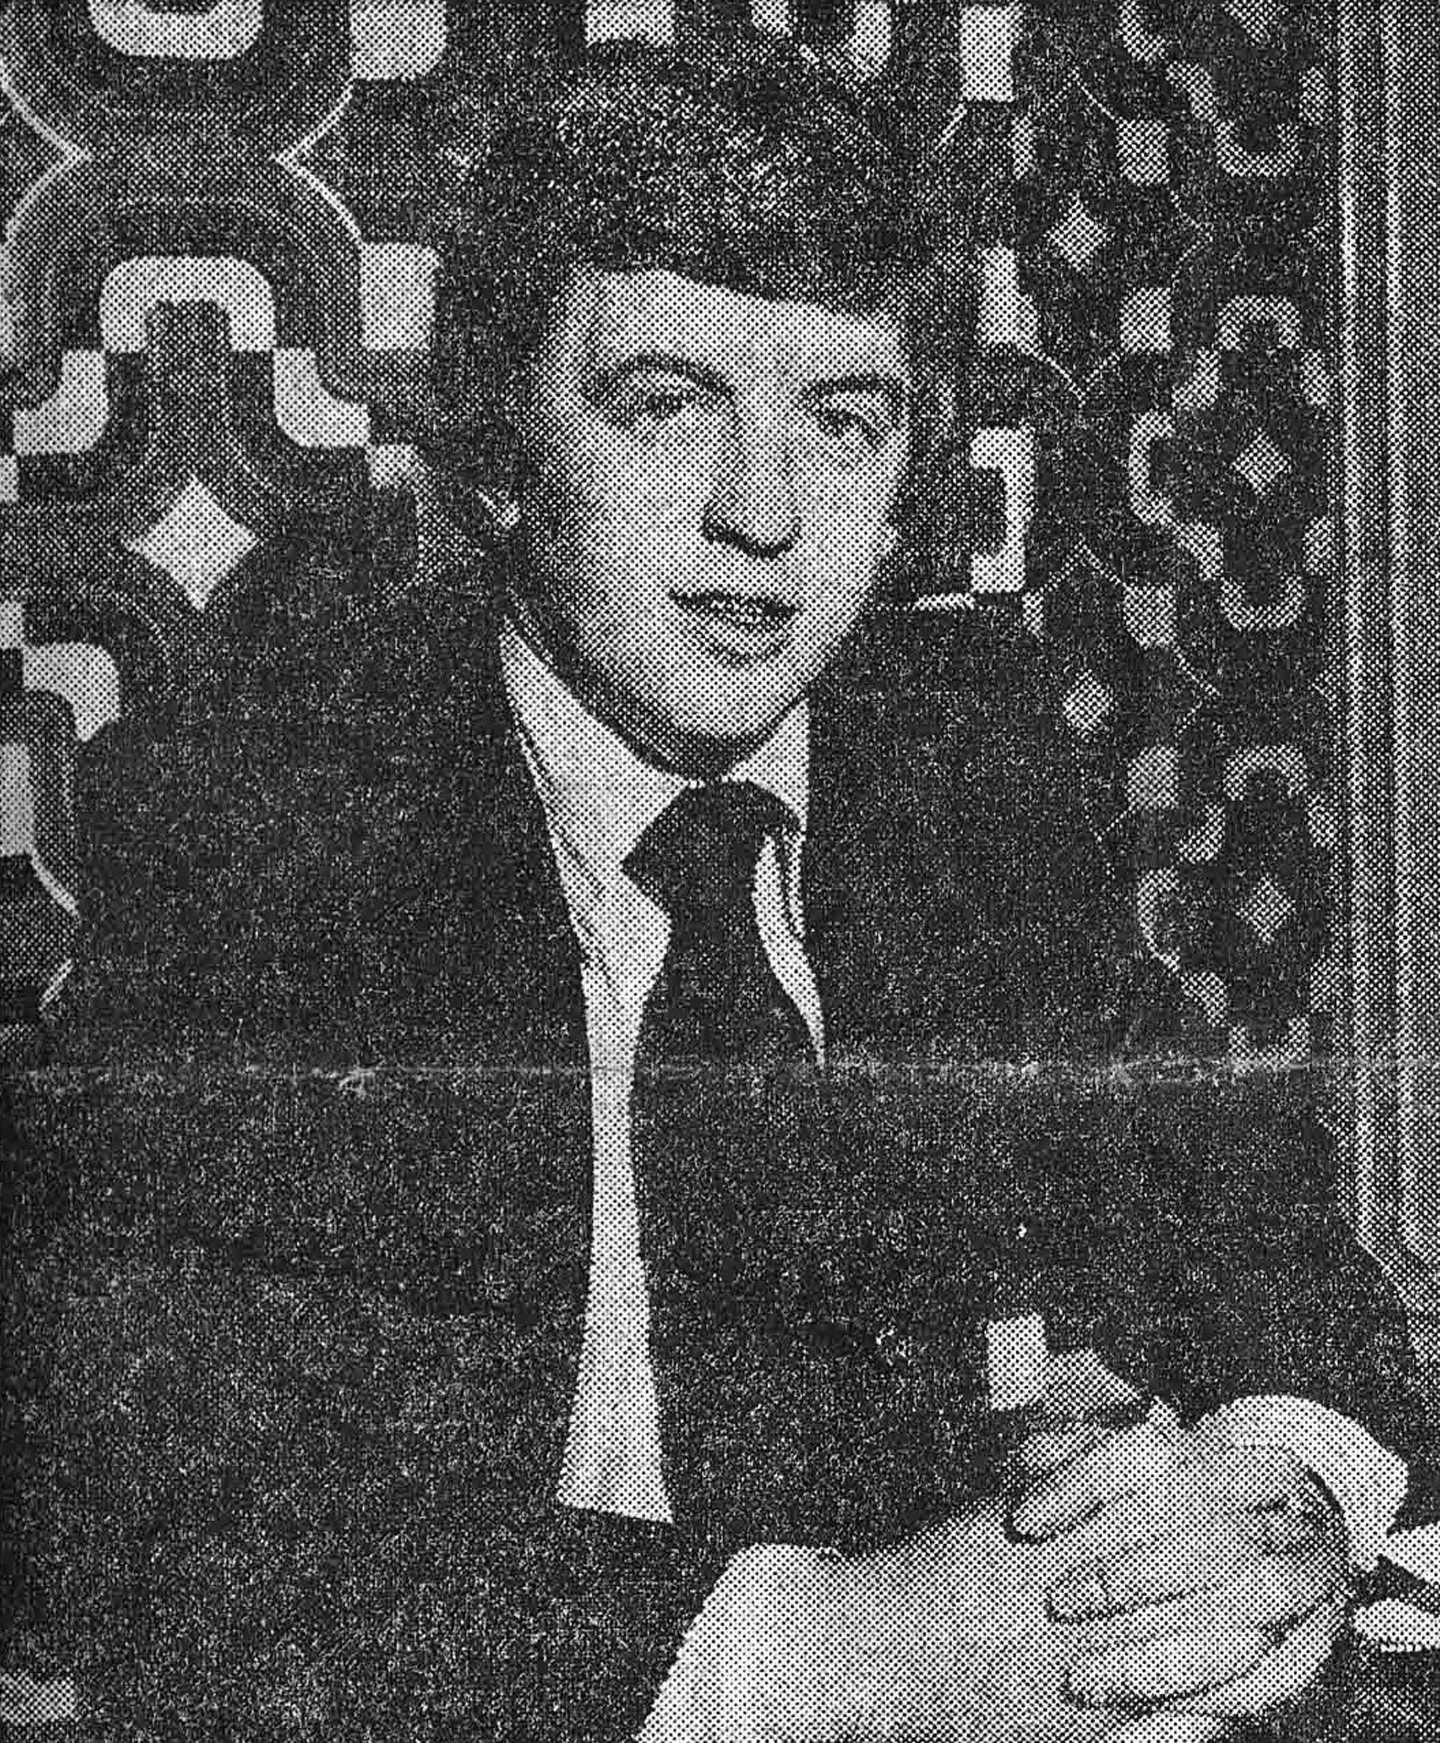 a picture of Arthur Hinchey taken from a newspaper and showing him in suit and tie